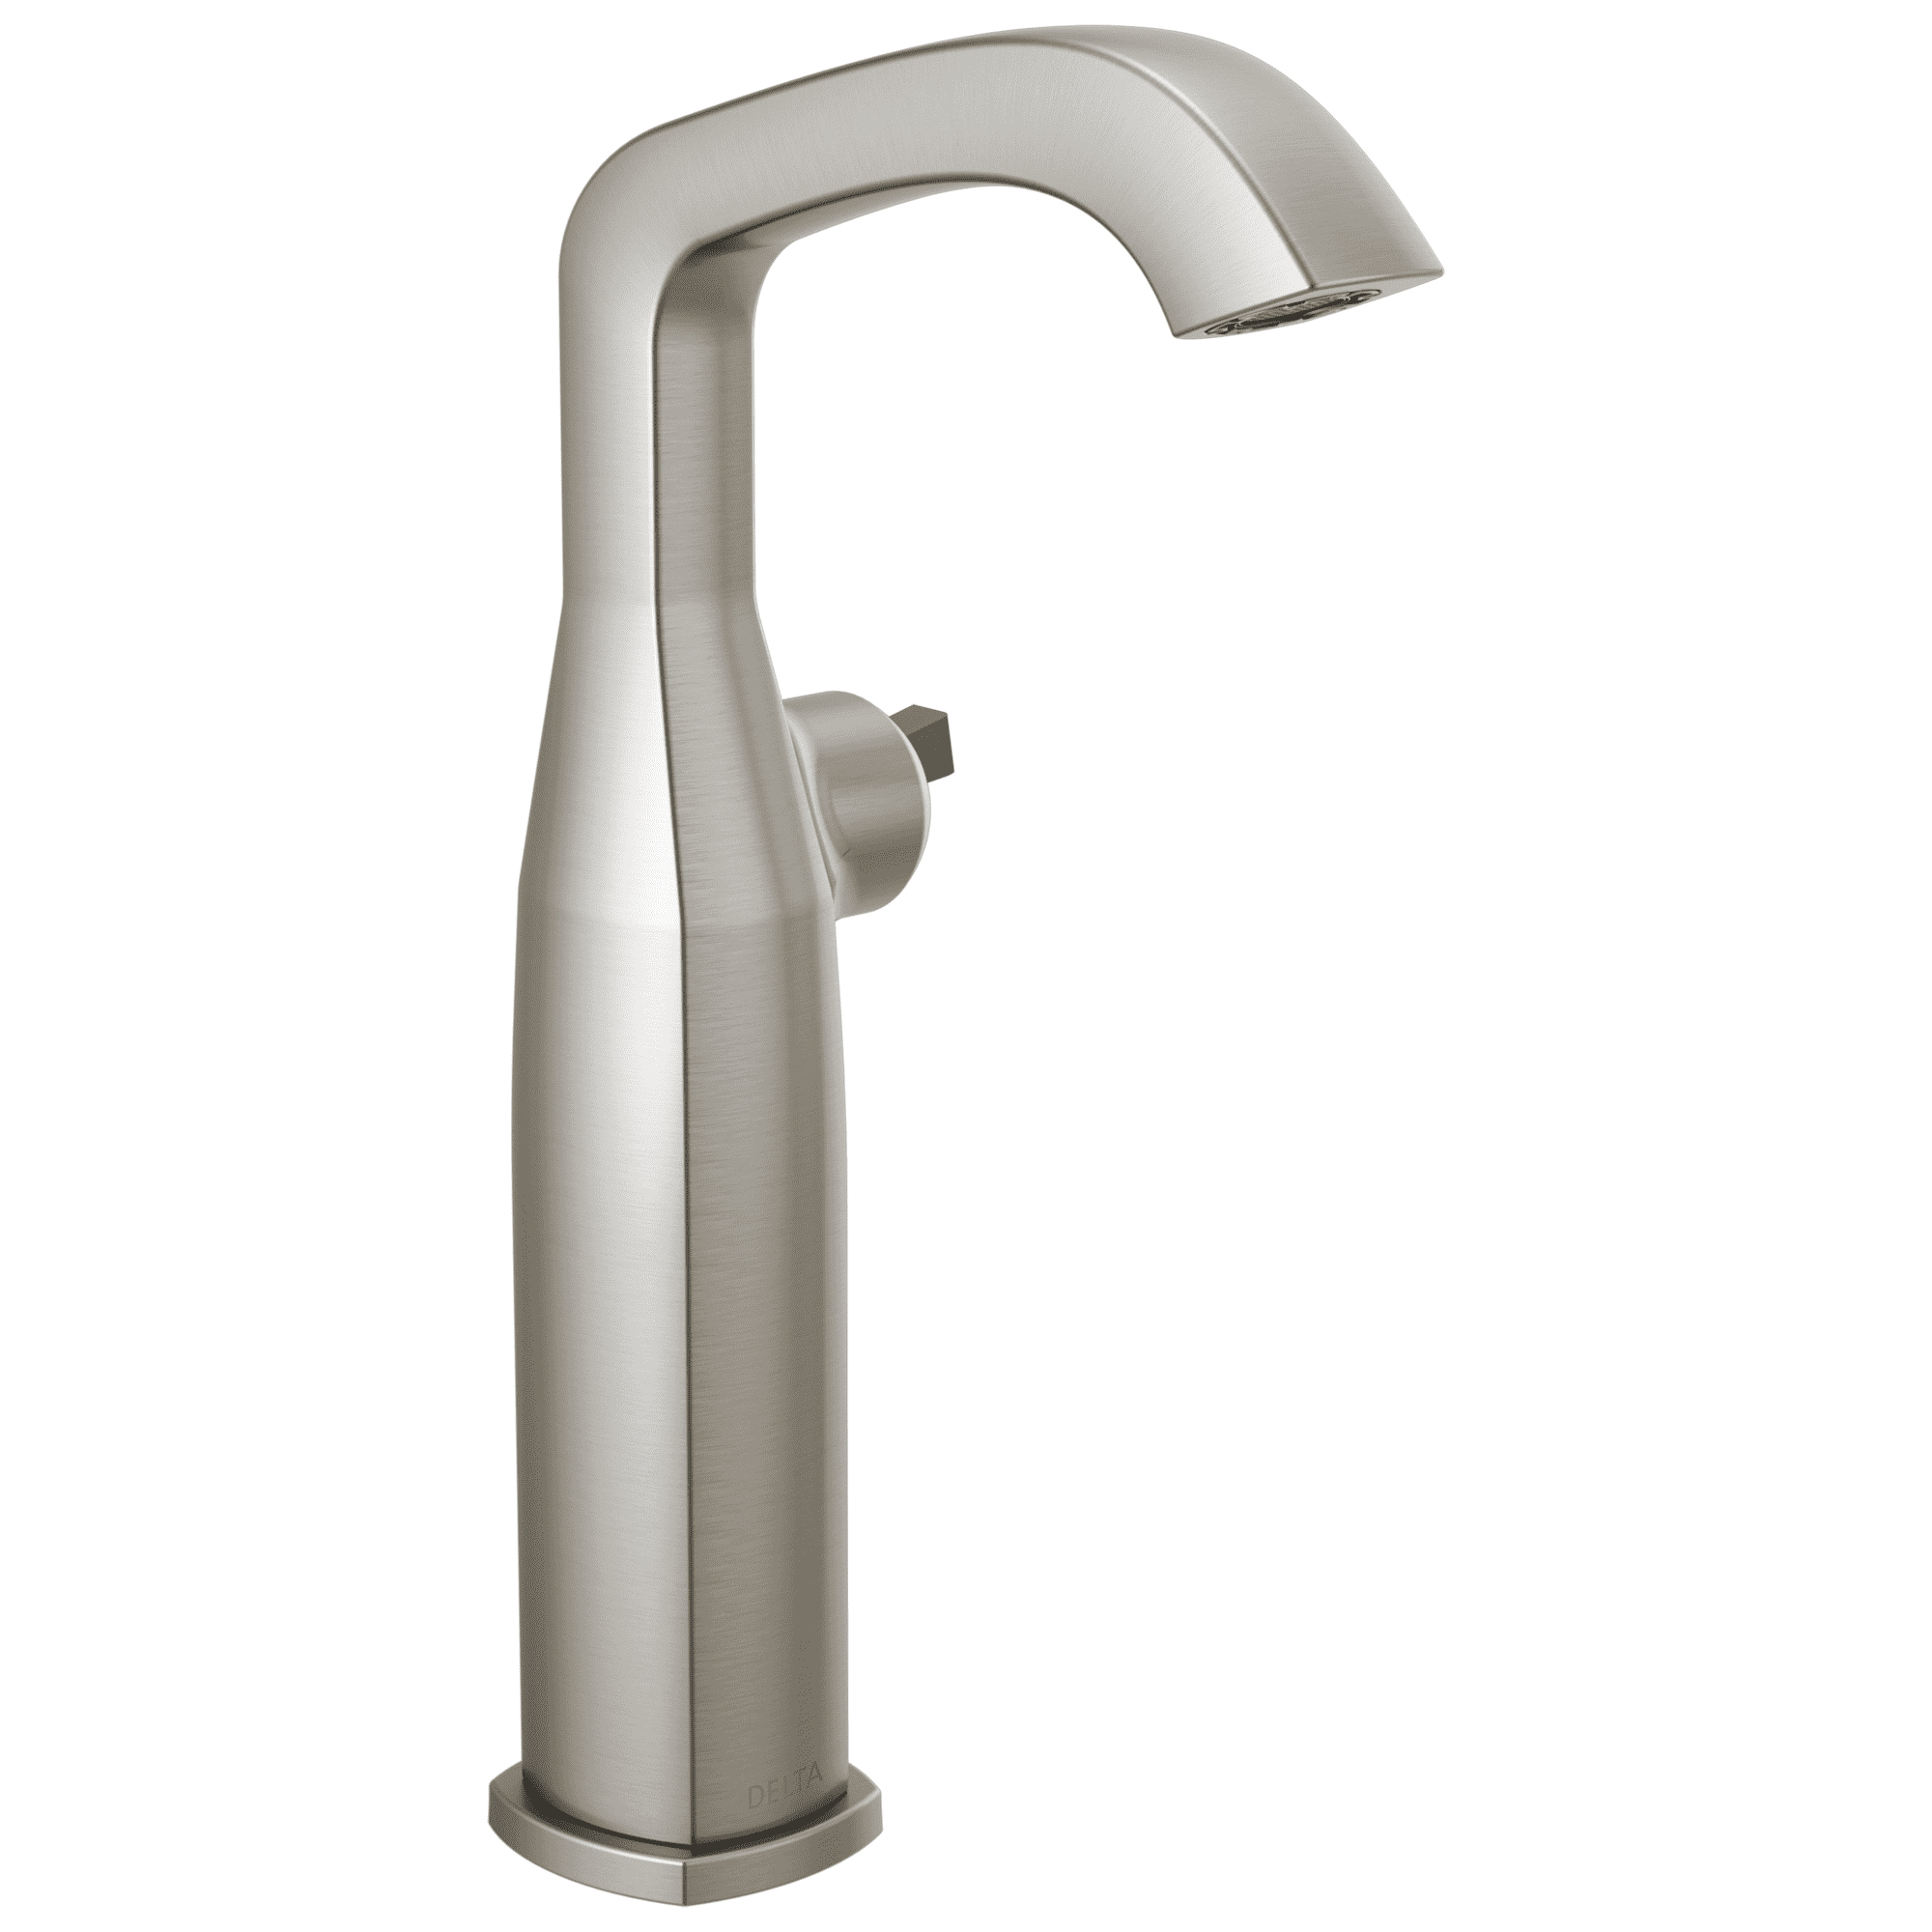 Stryke Vessel Lav Faucet in Stainless Steel Less Handle